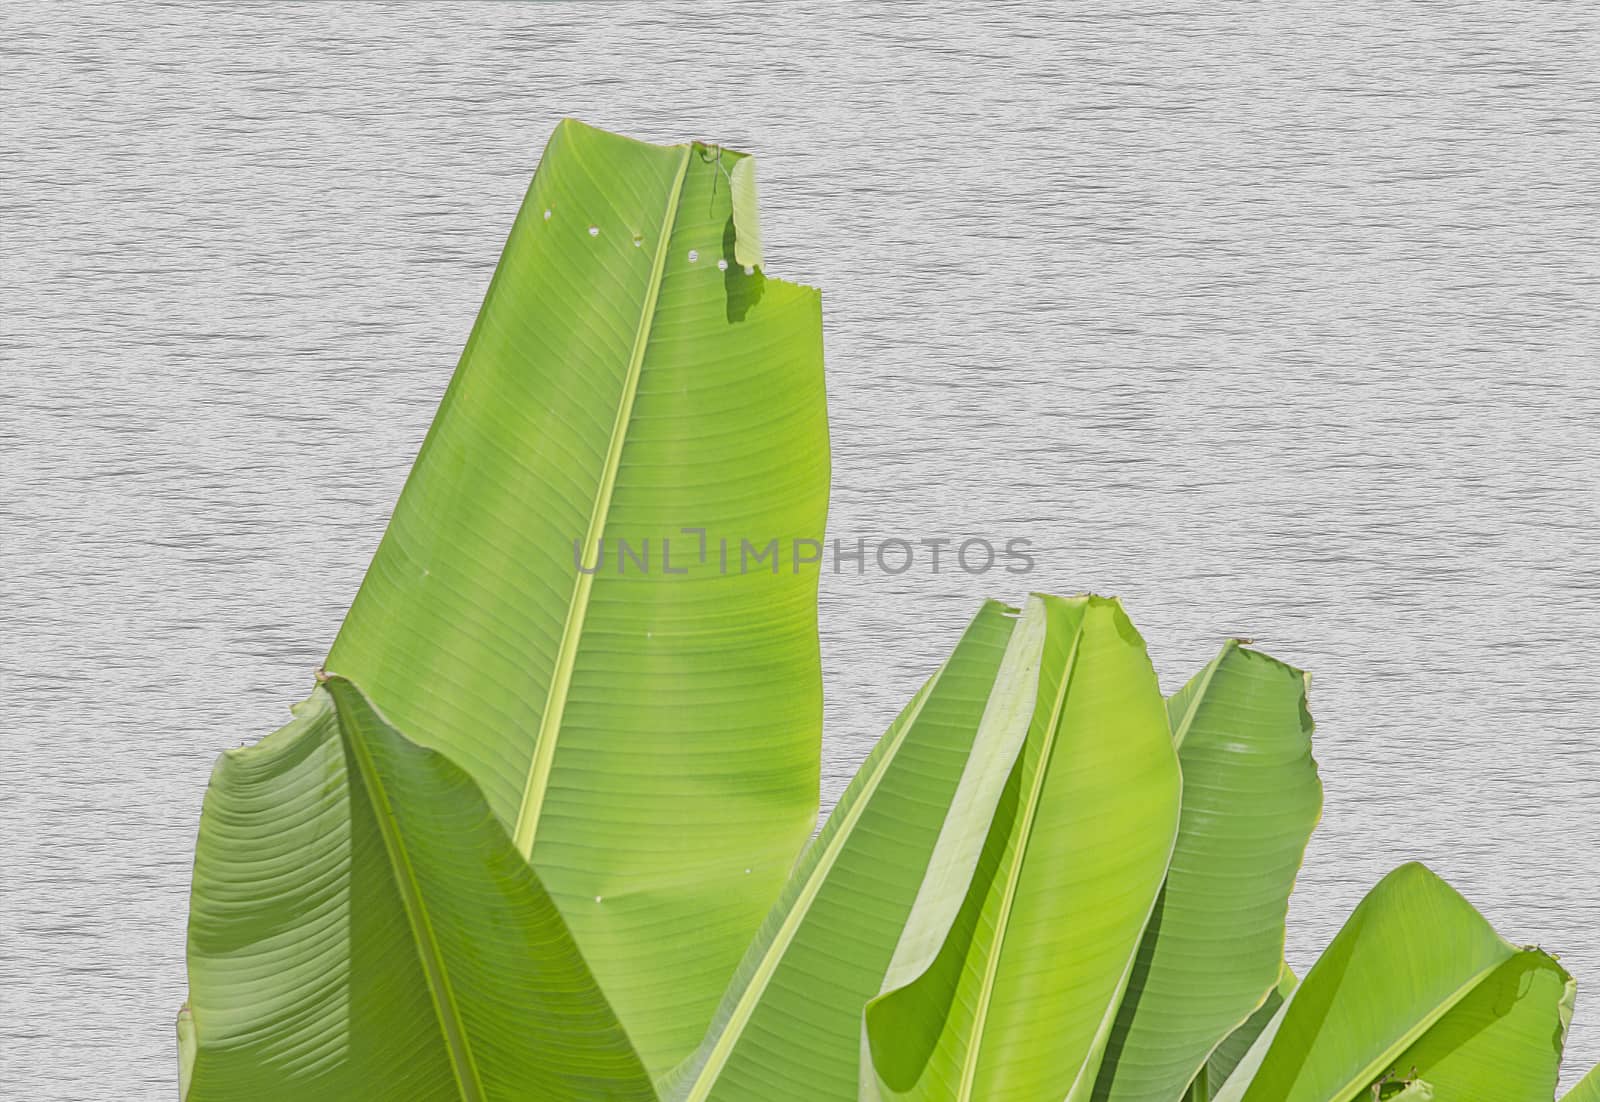 The Bright Banana Leaf on Wooden Wall Background